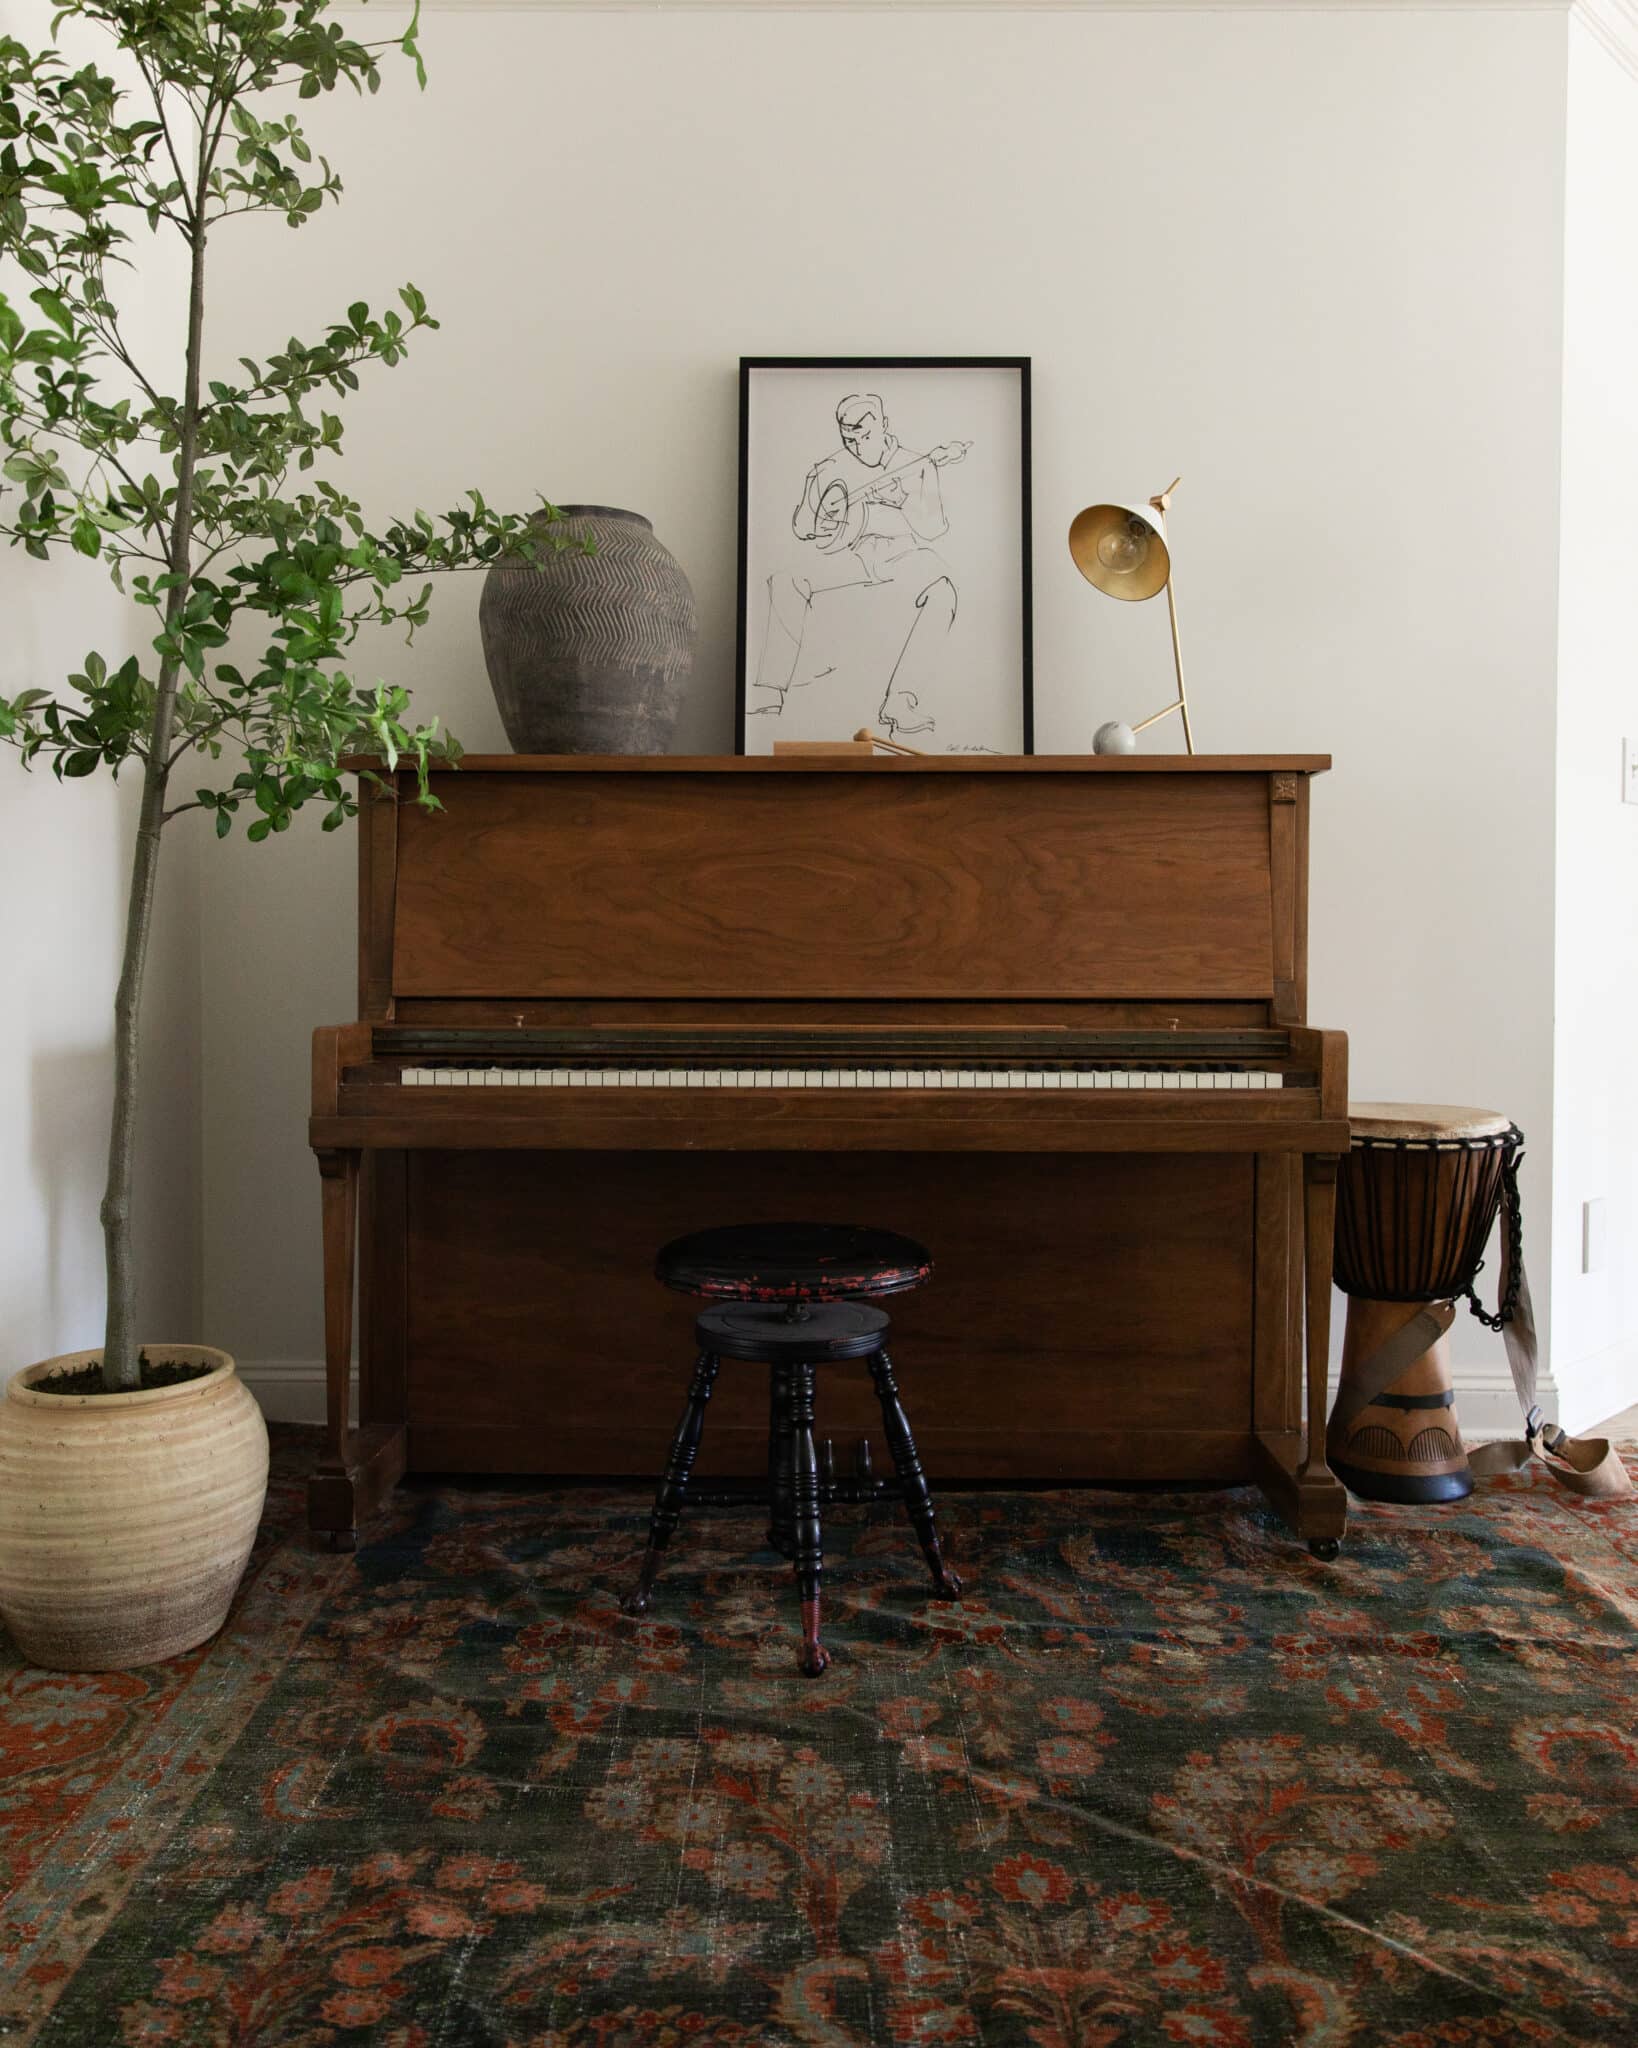 Chris Loves Julia | Upstairs landing with piano, stool and brass lamp